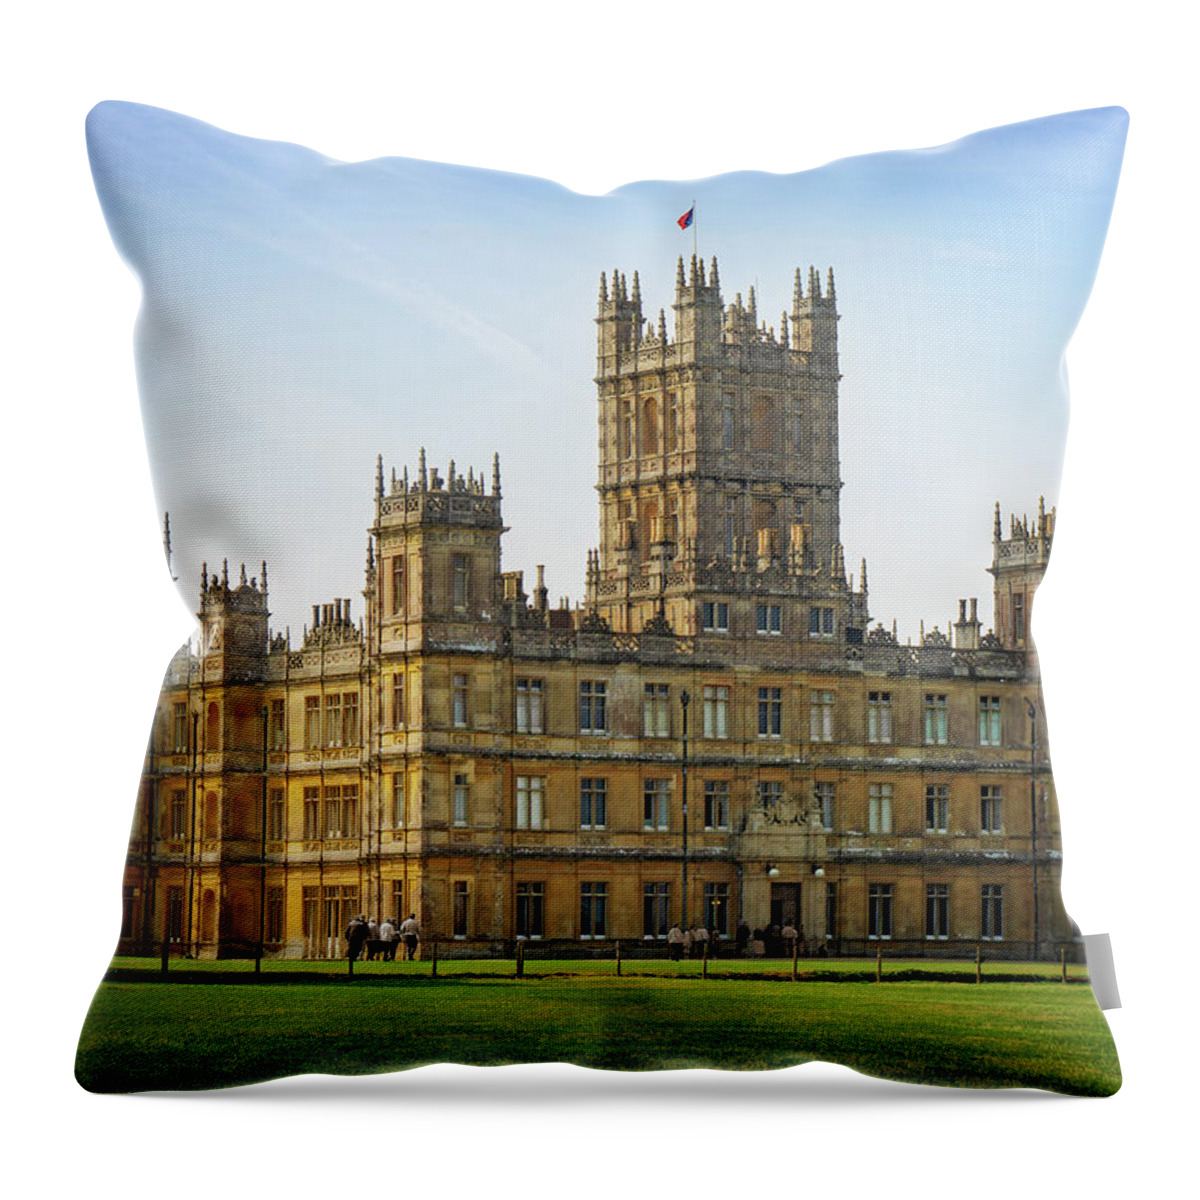 Highclere Castle Throw Pillow featuring the photograph Highclere Castle by Joe Winkler